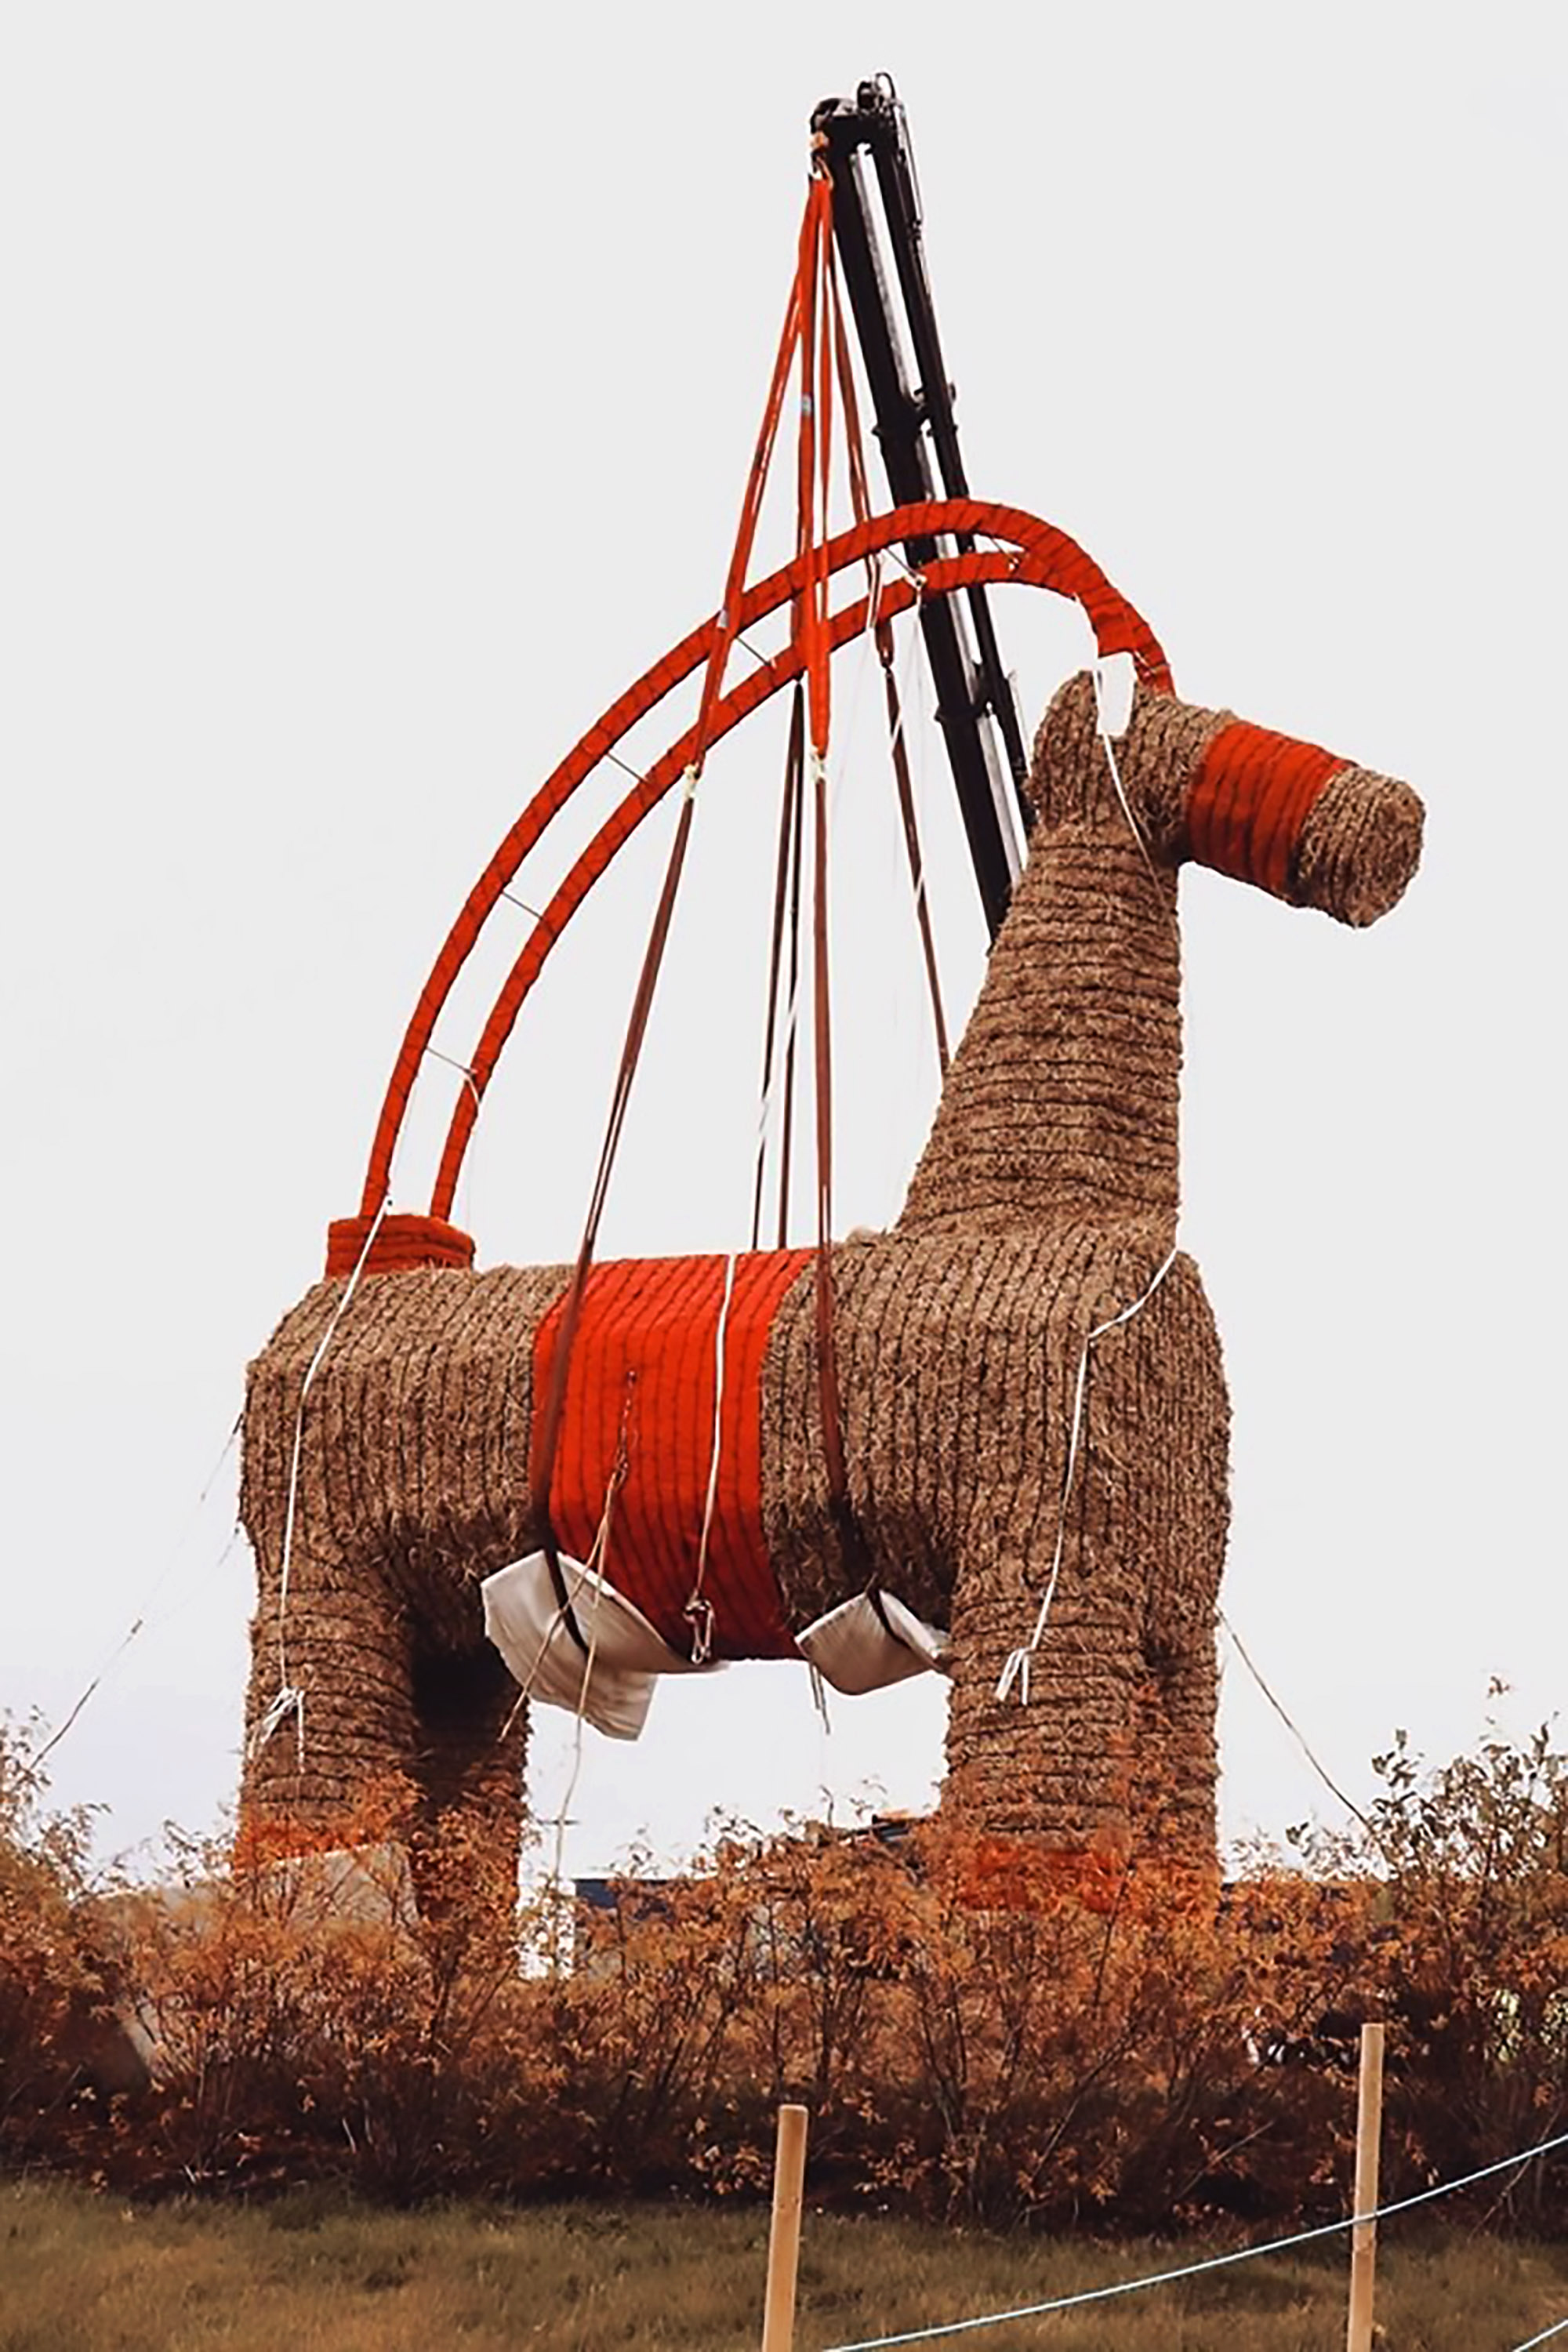 Read more about the article IKEA Bosses Hope Cursed Straw Goat Survives This Xmas